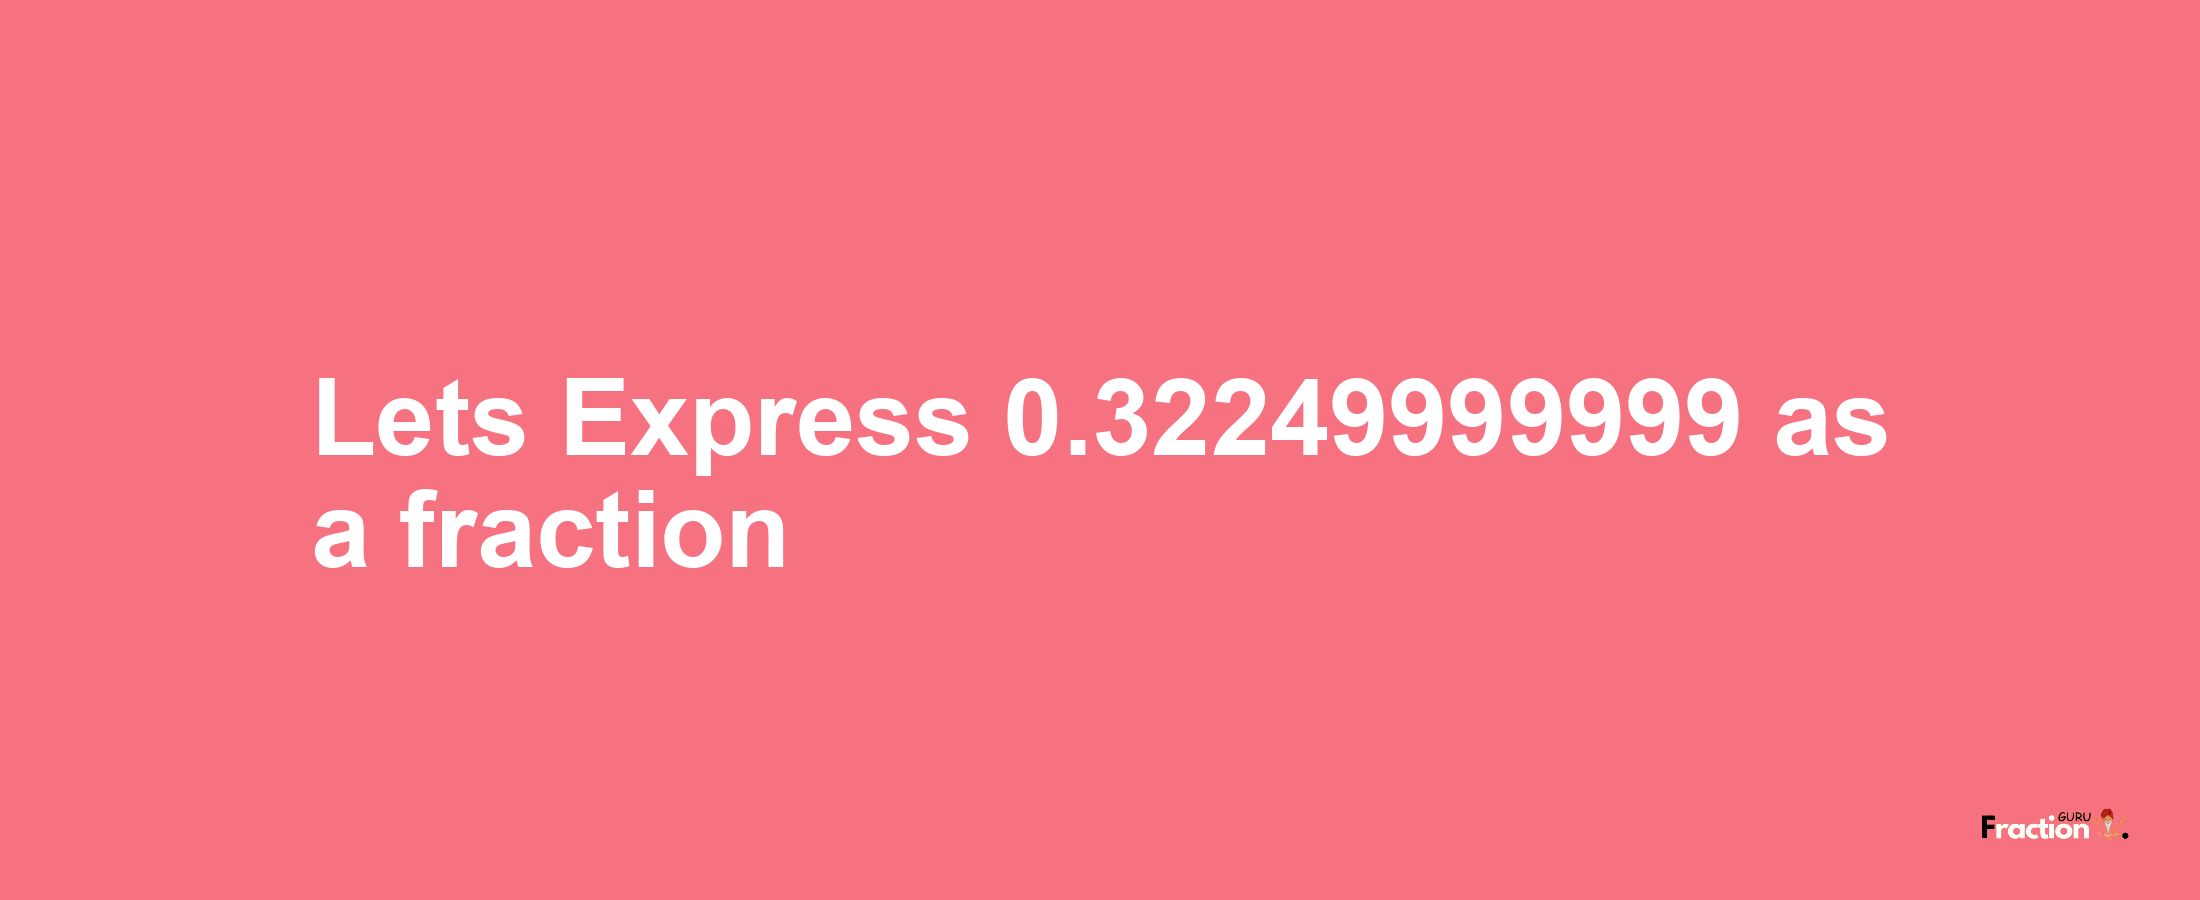 Lets Express 0.32249999999 as afraction